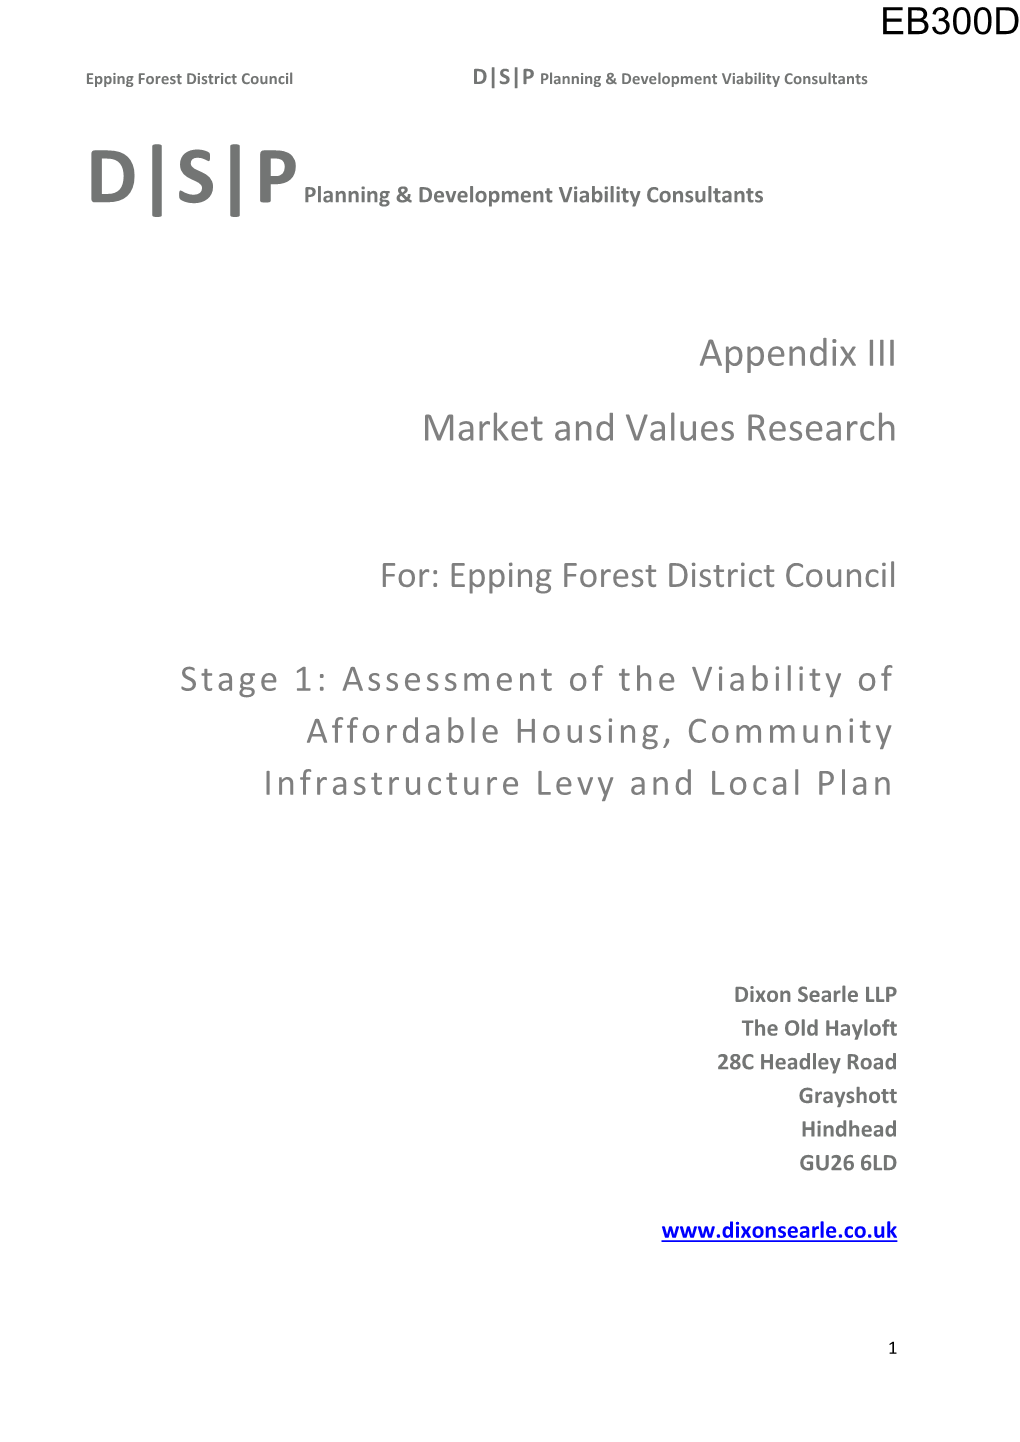 Appendix III Market and Values Research